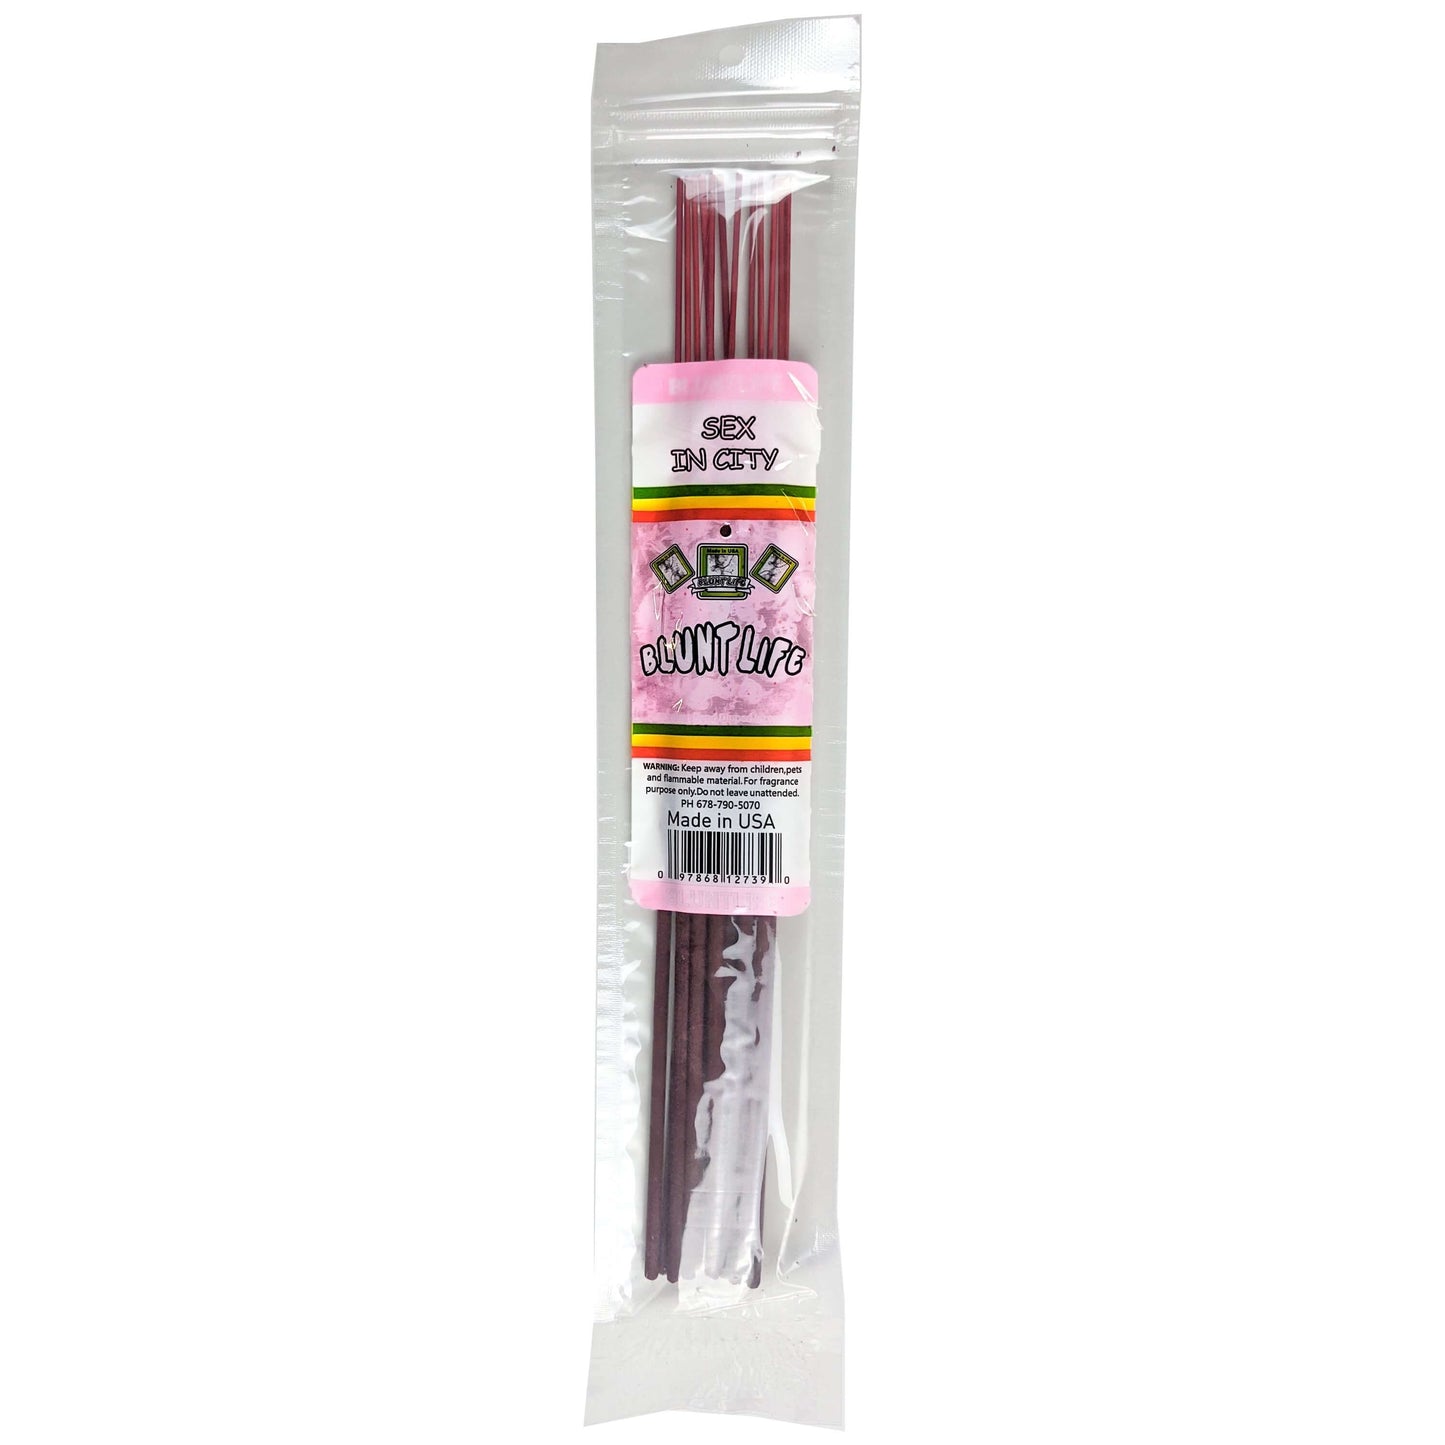 Sex In City Scent 10.5" BluntLife Incense, 12-Stick Pack